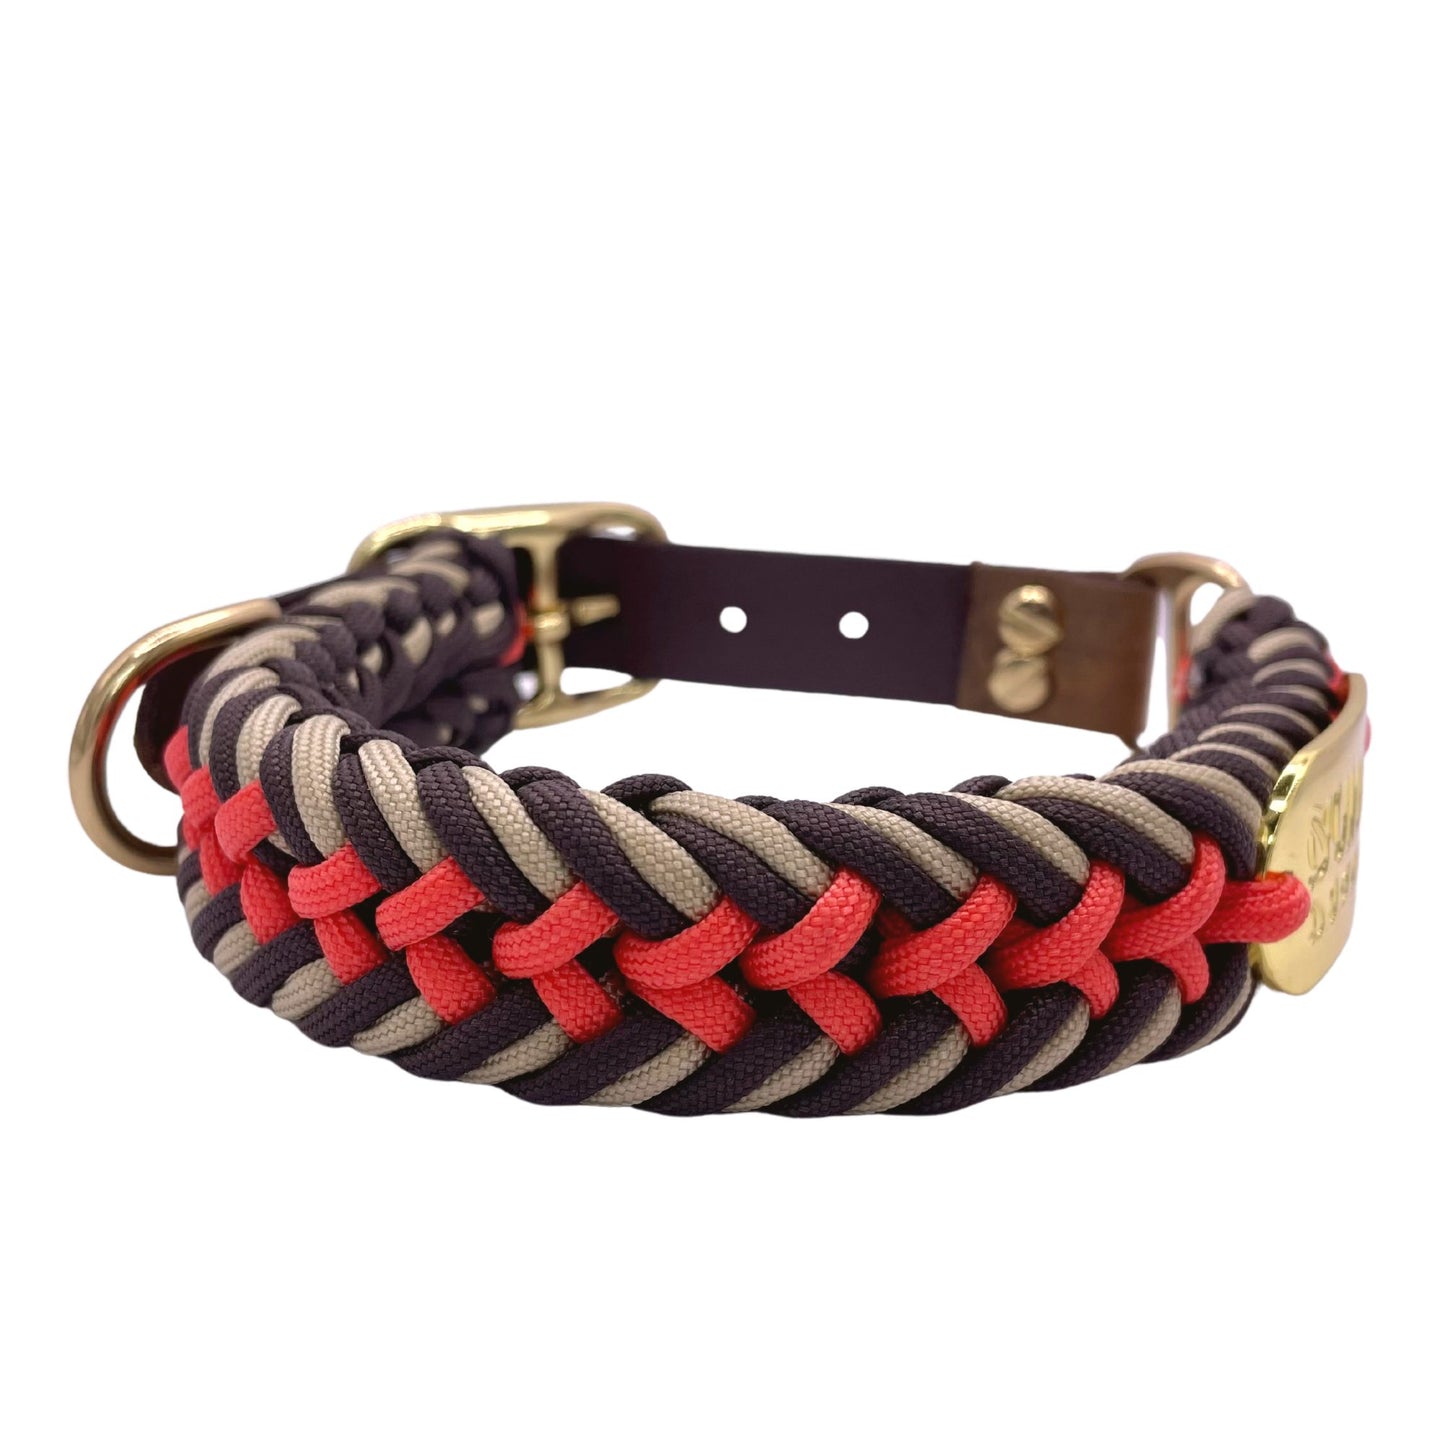 Retro Summer Paracord Dog Collar with Leather or Biothane Belt and Gold hardware